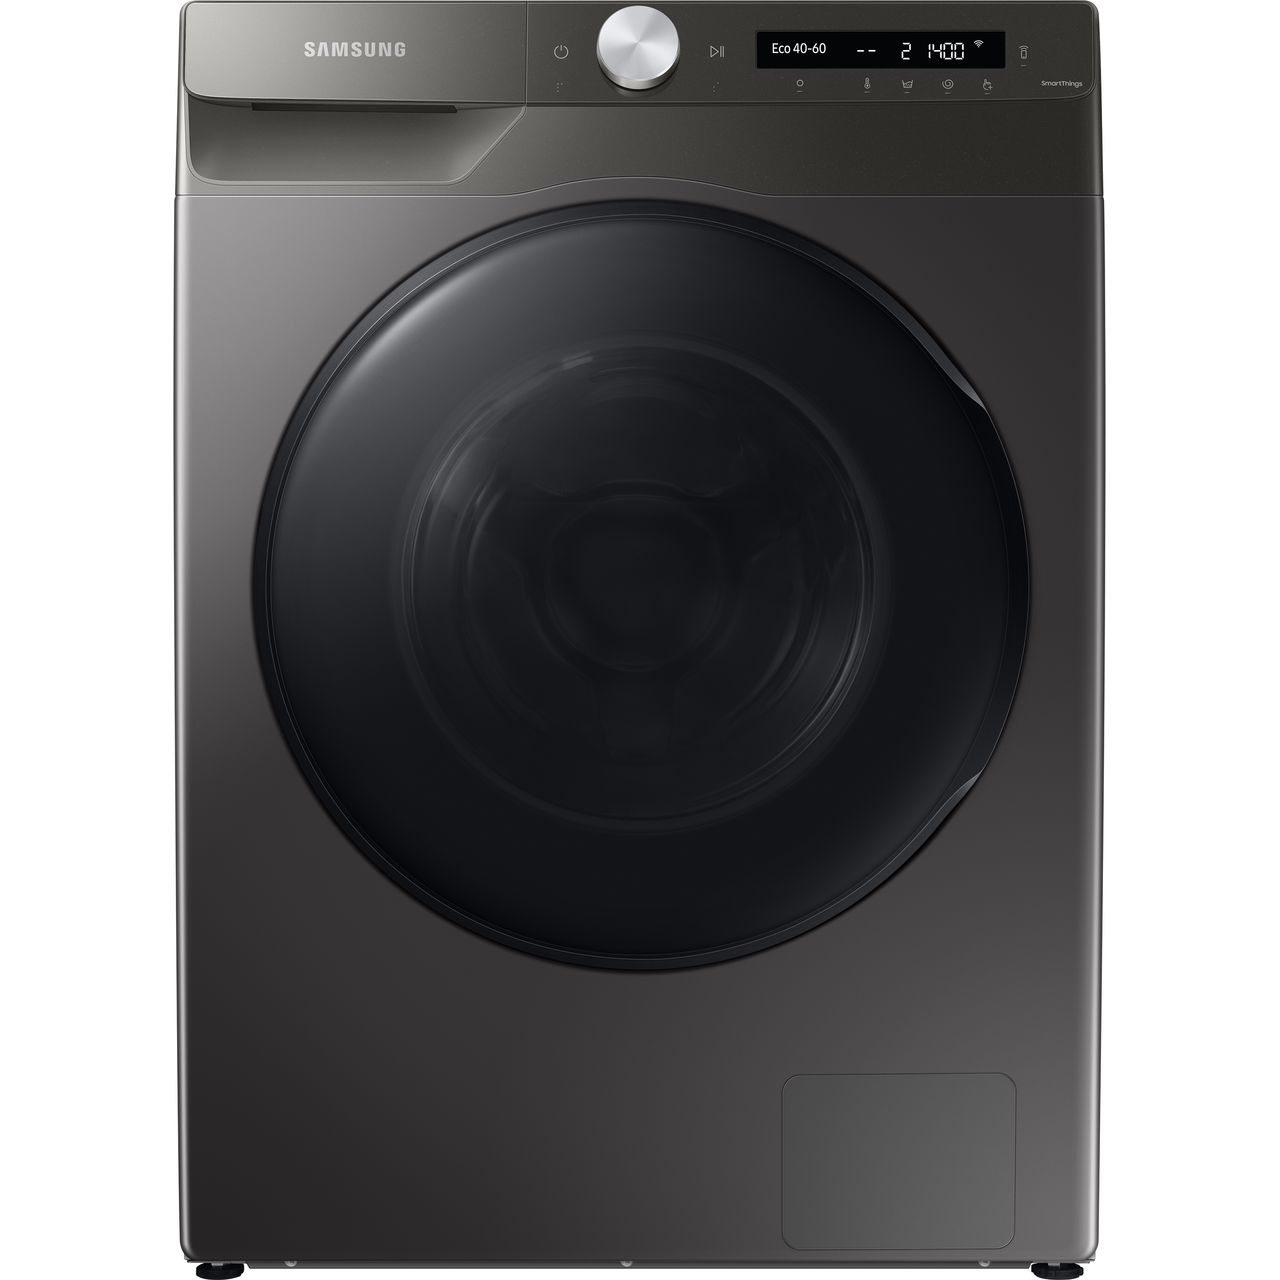 Samsung WD5300T WD90T534DBN Wifi Connected 9Kg / 6Kg Washer Dryer with 1400 rpm Review